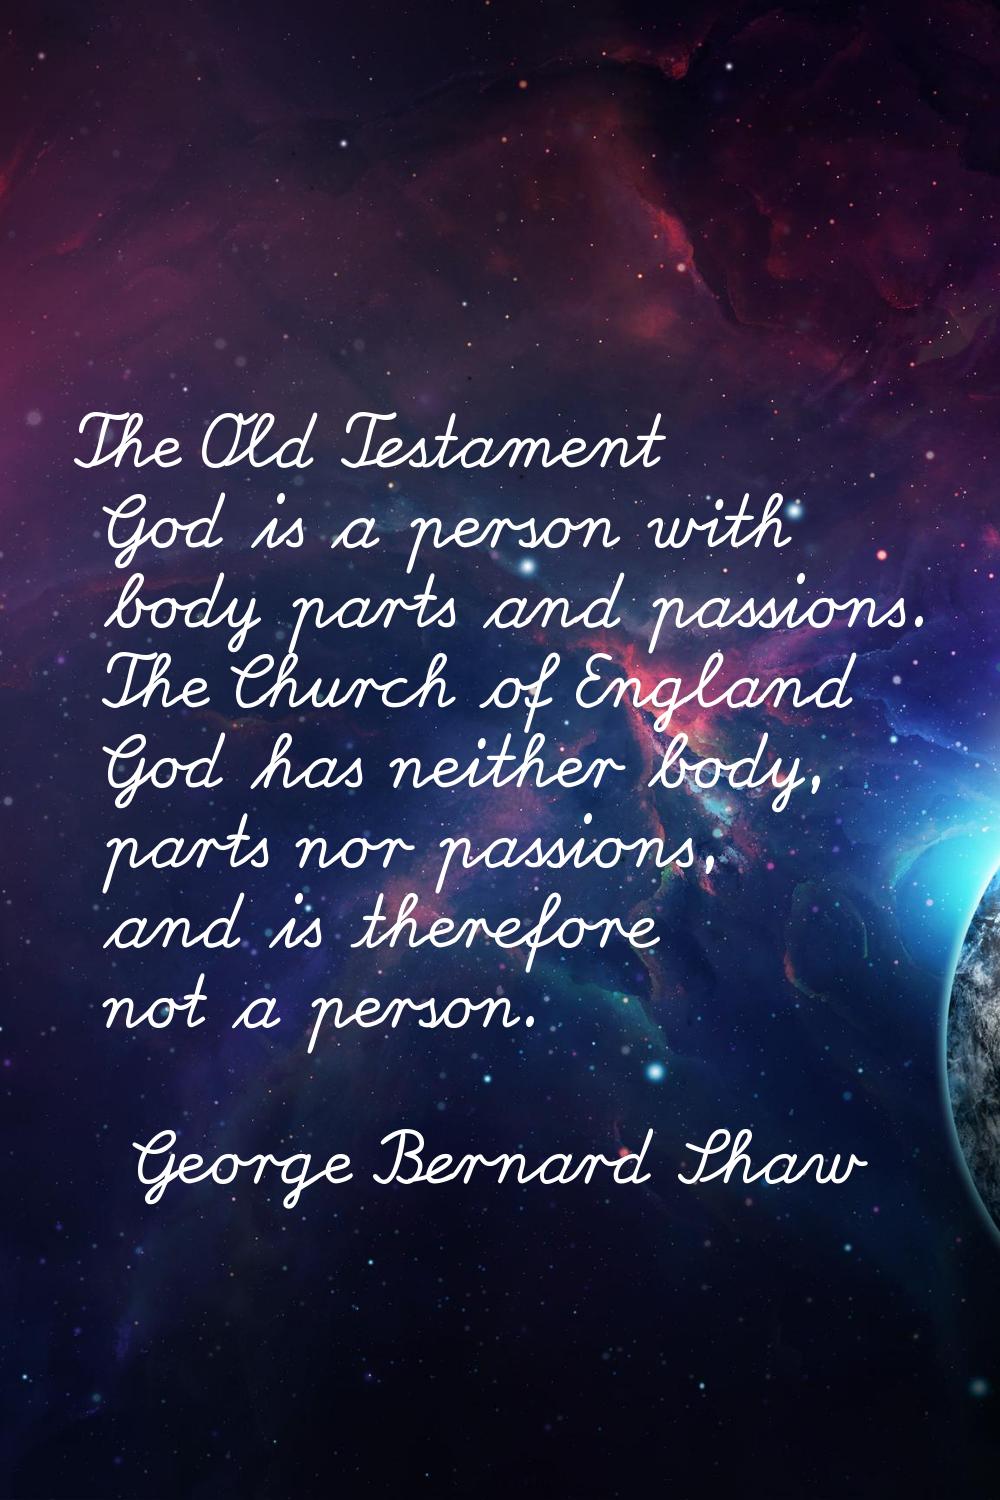 The Old Testament God is a person with body parts and passions. The Church of England God has neith